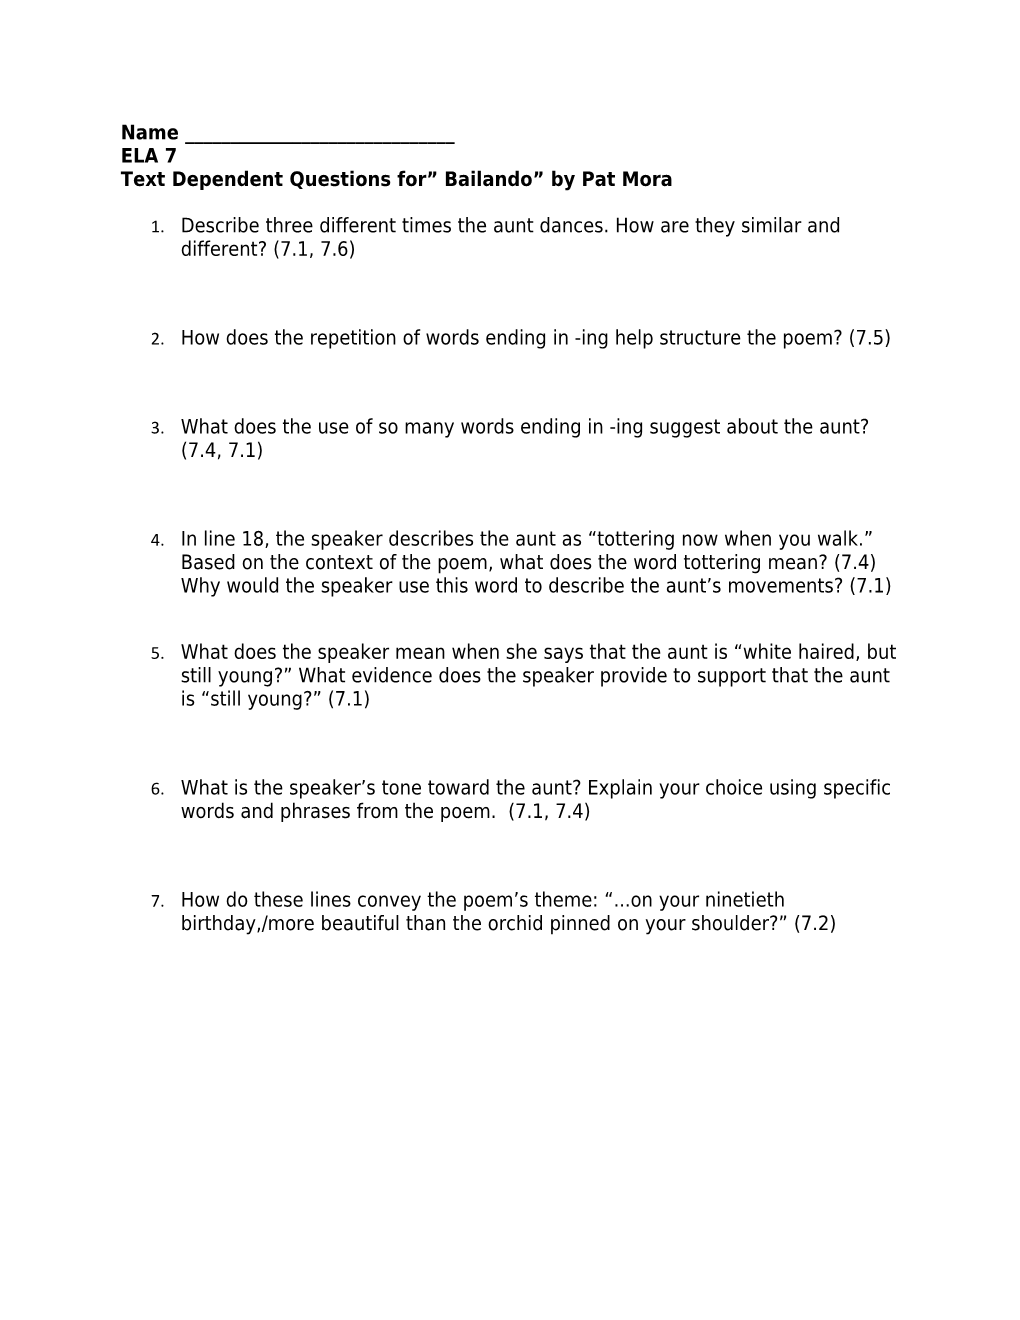 Text Dependent Questions for Bailando by Pat Mora